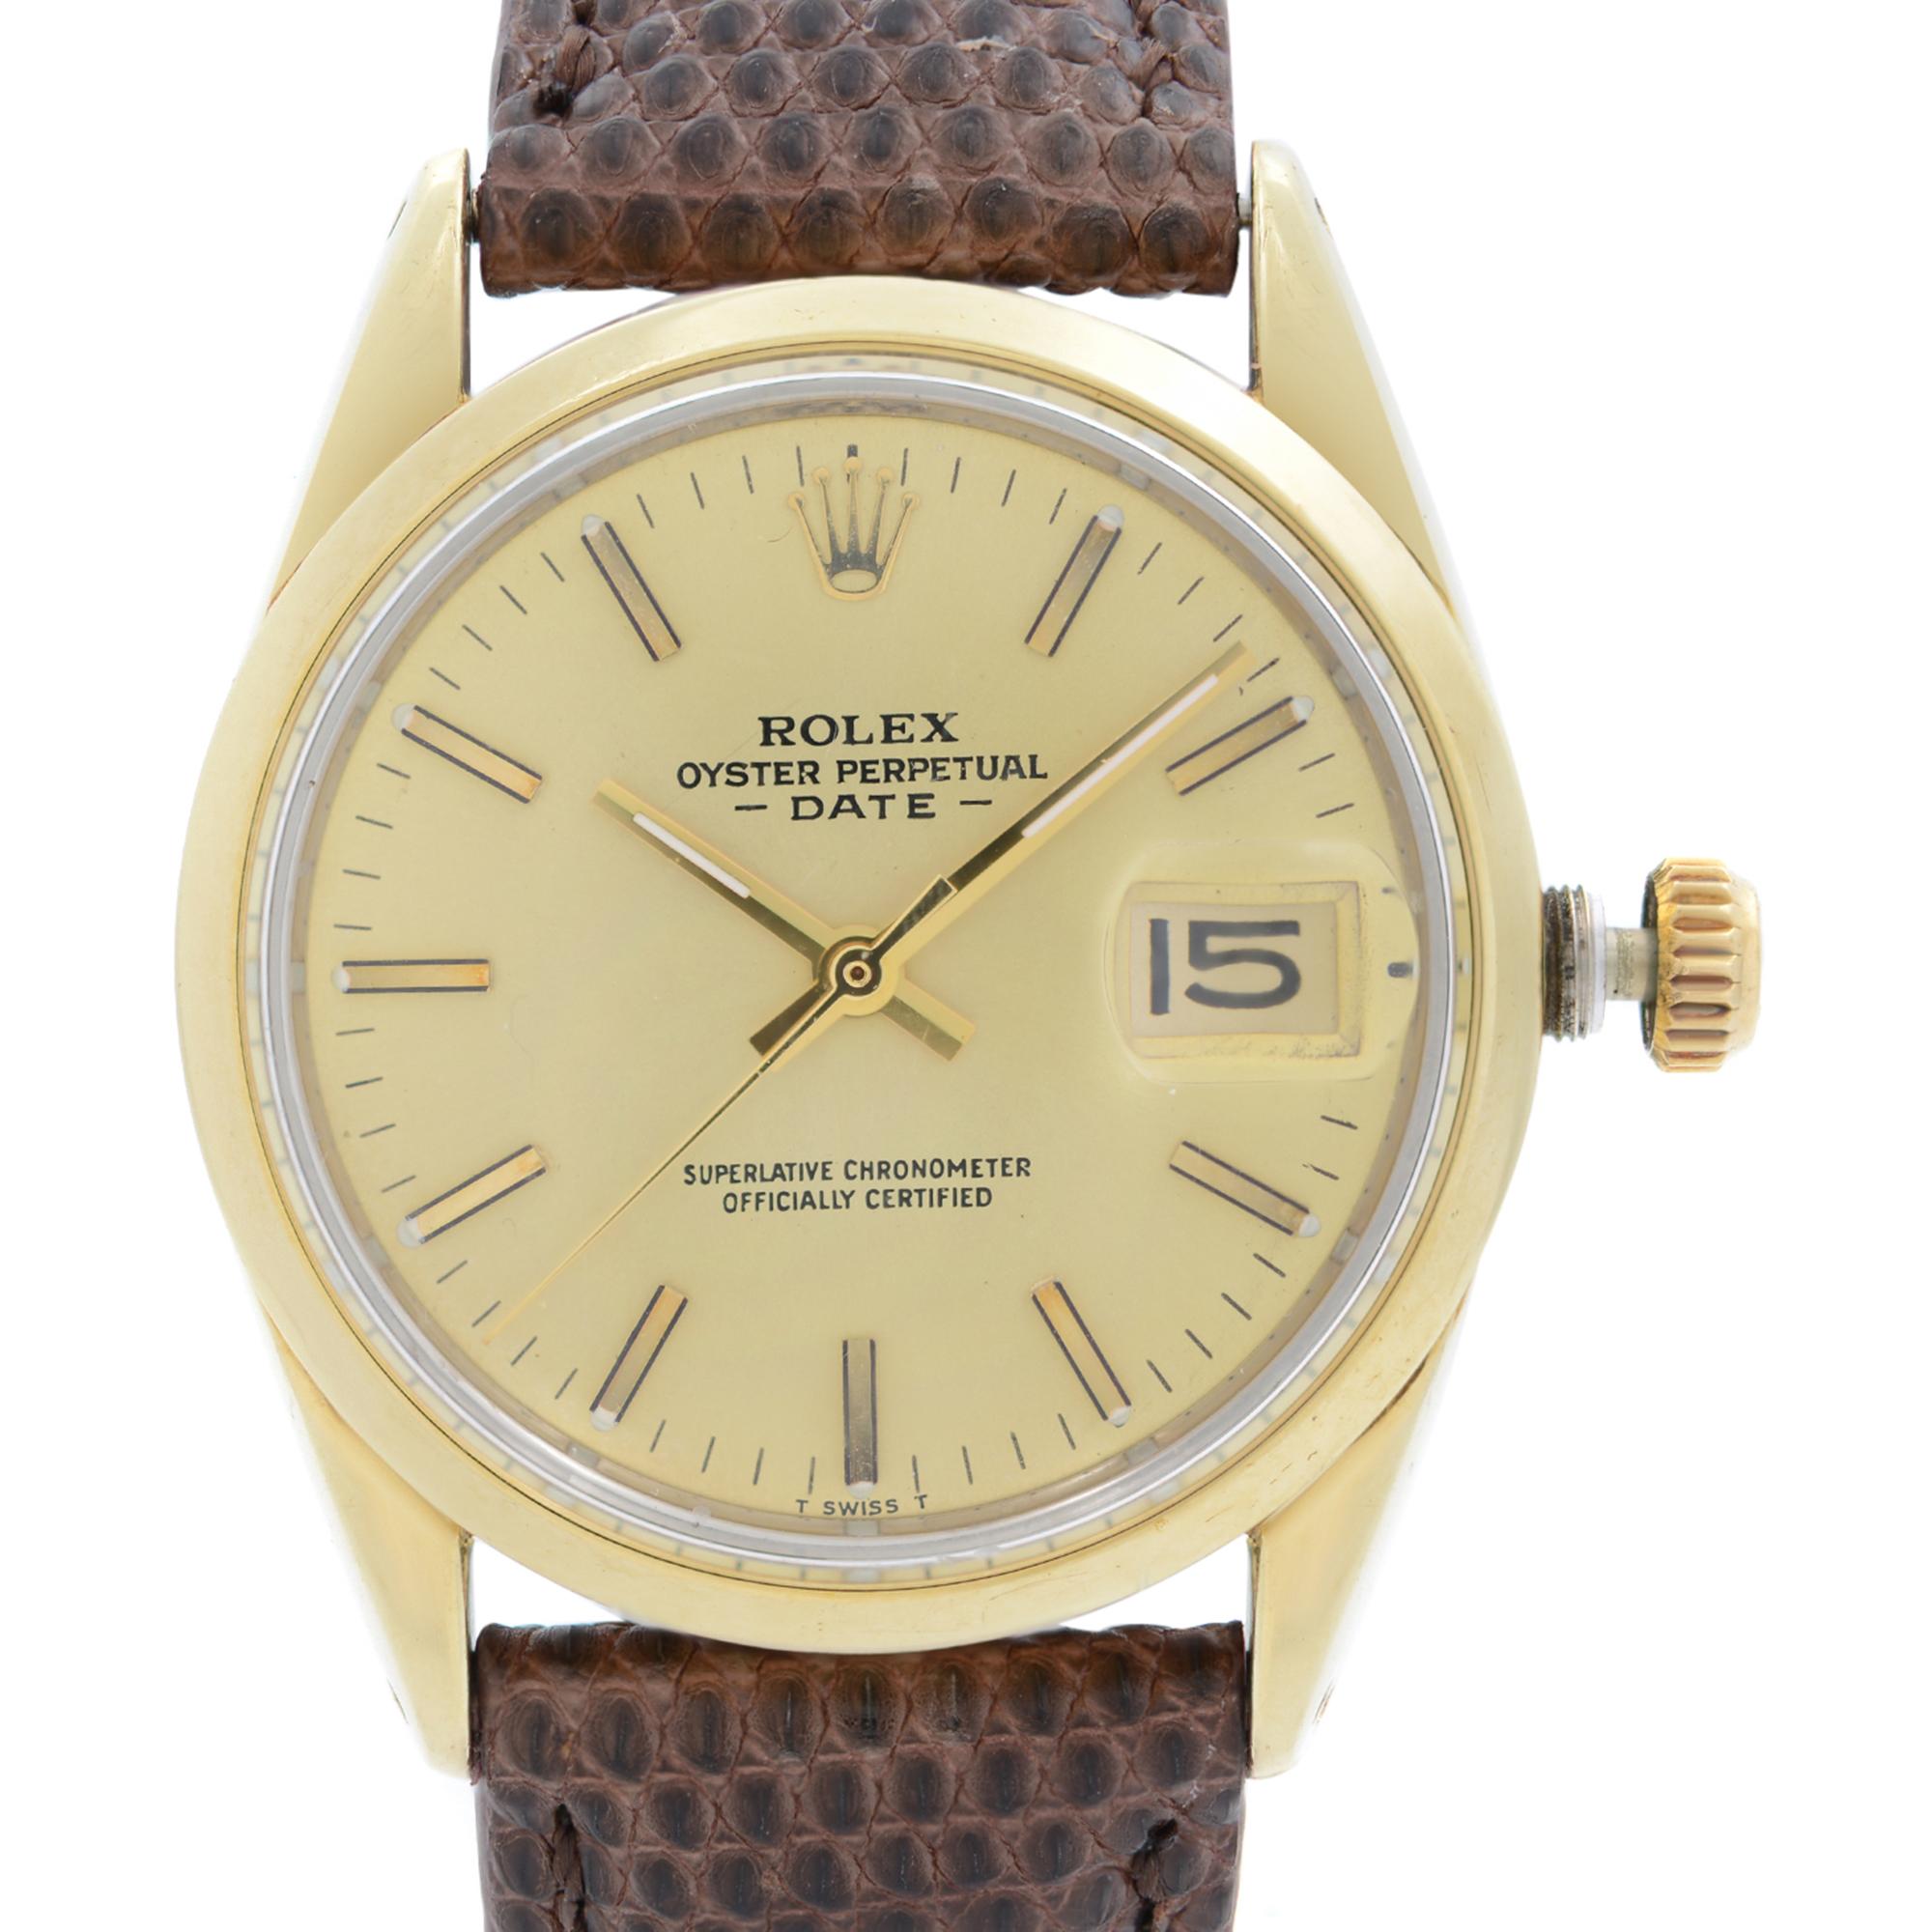 Vintage Pre-owned Vintage Rolex Oyster Perpetual Date 34mm Gold Cap Steel Champagne Dial Men's Watch 15505. This Beautiful Timepiece Was Produced in 1972. It Has An Aftermarket Band But An Original Rolex Buckle. The Watch Case Shows Multiple Dents